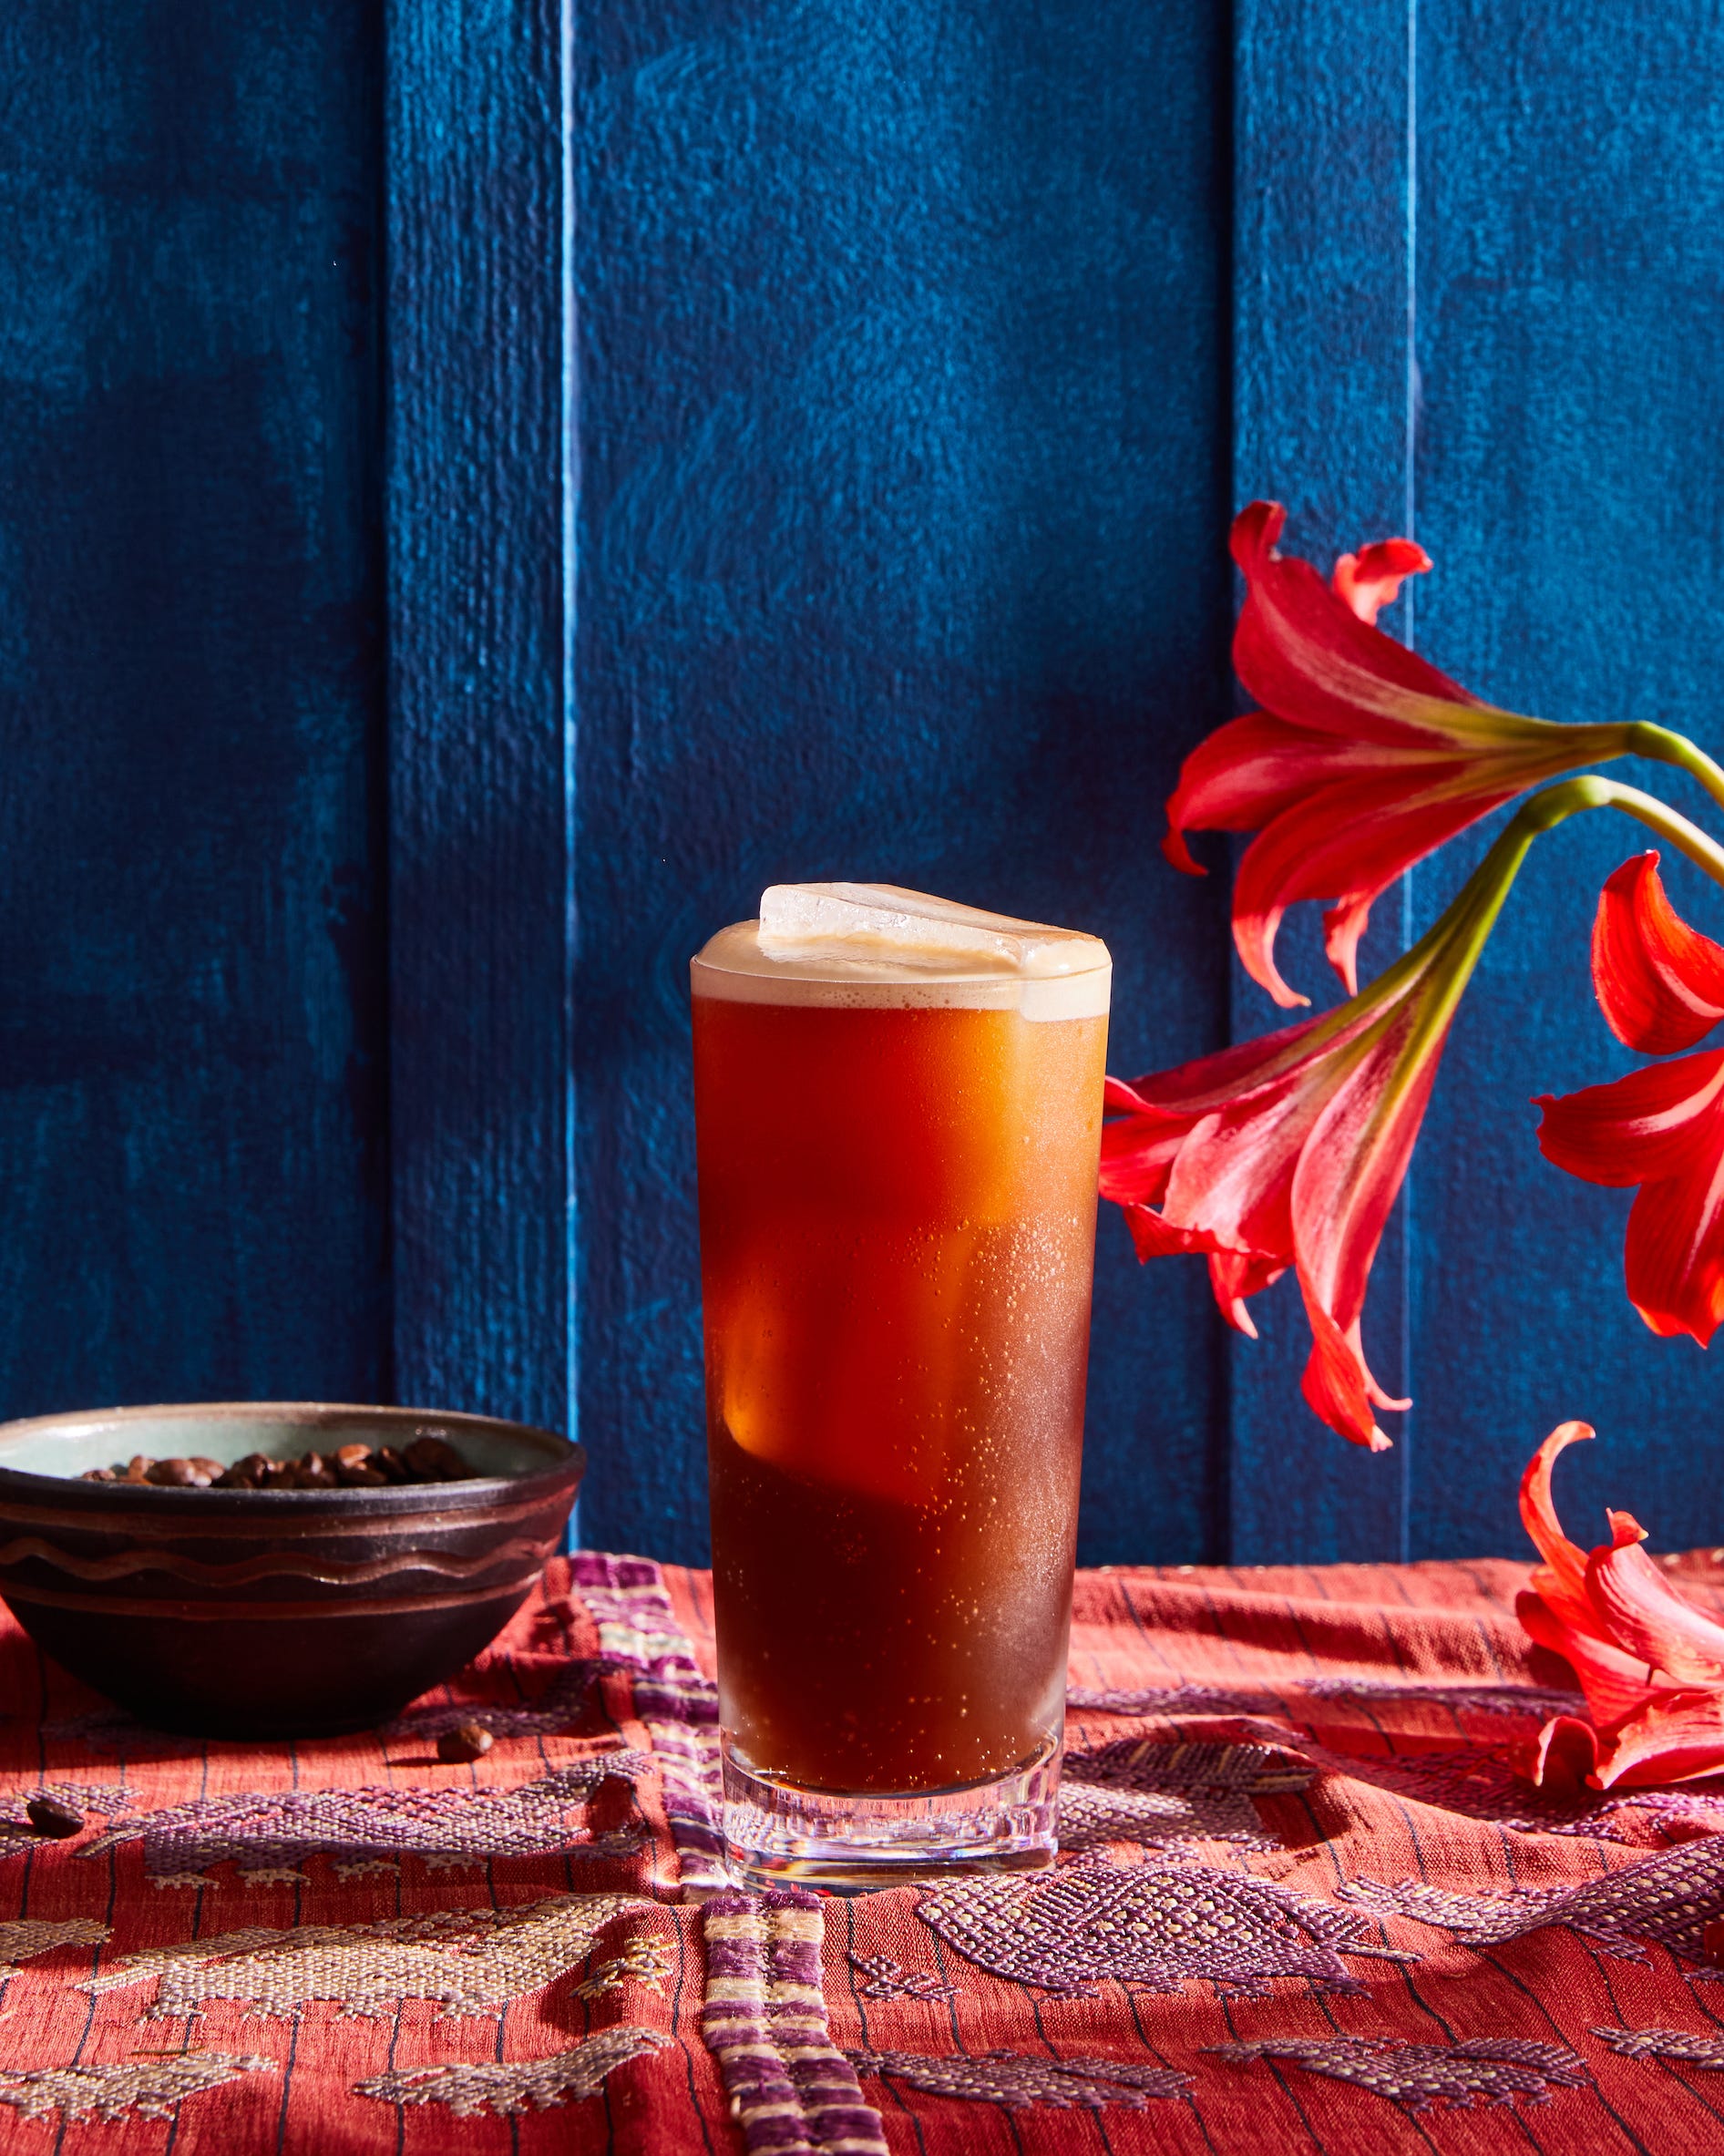 We're Calling It: The Carajillo Tónico Is Going to Be the Drink of the Summer